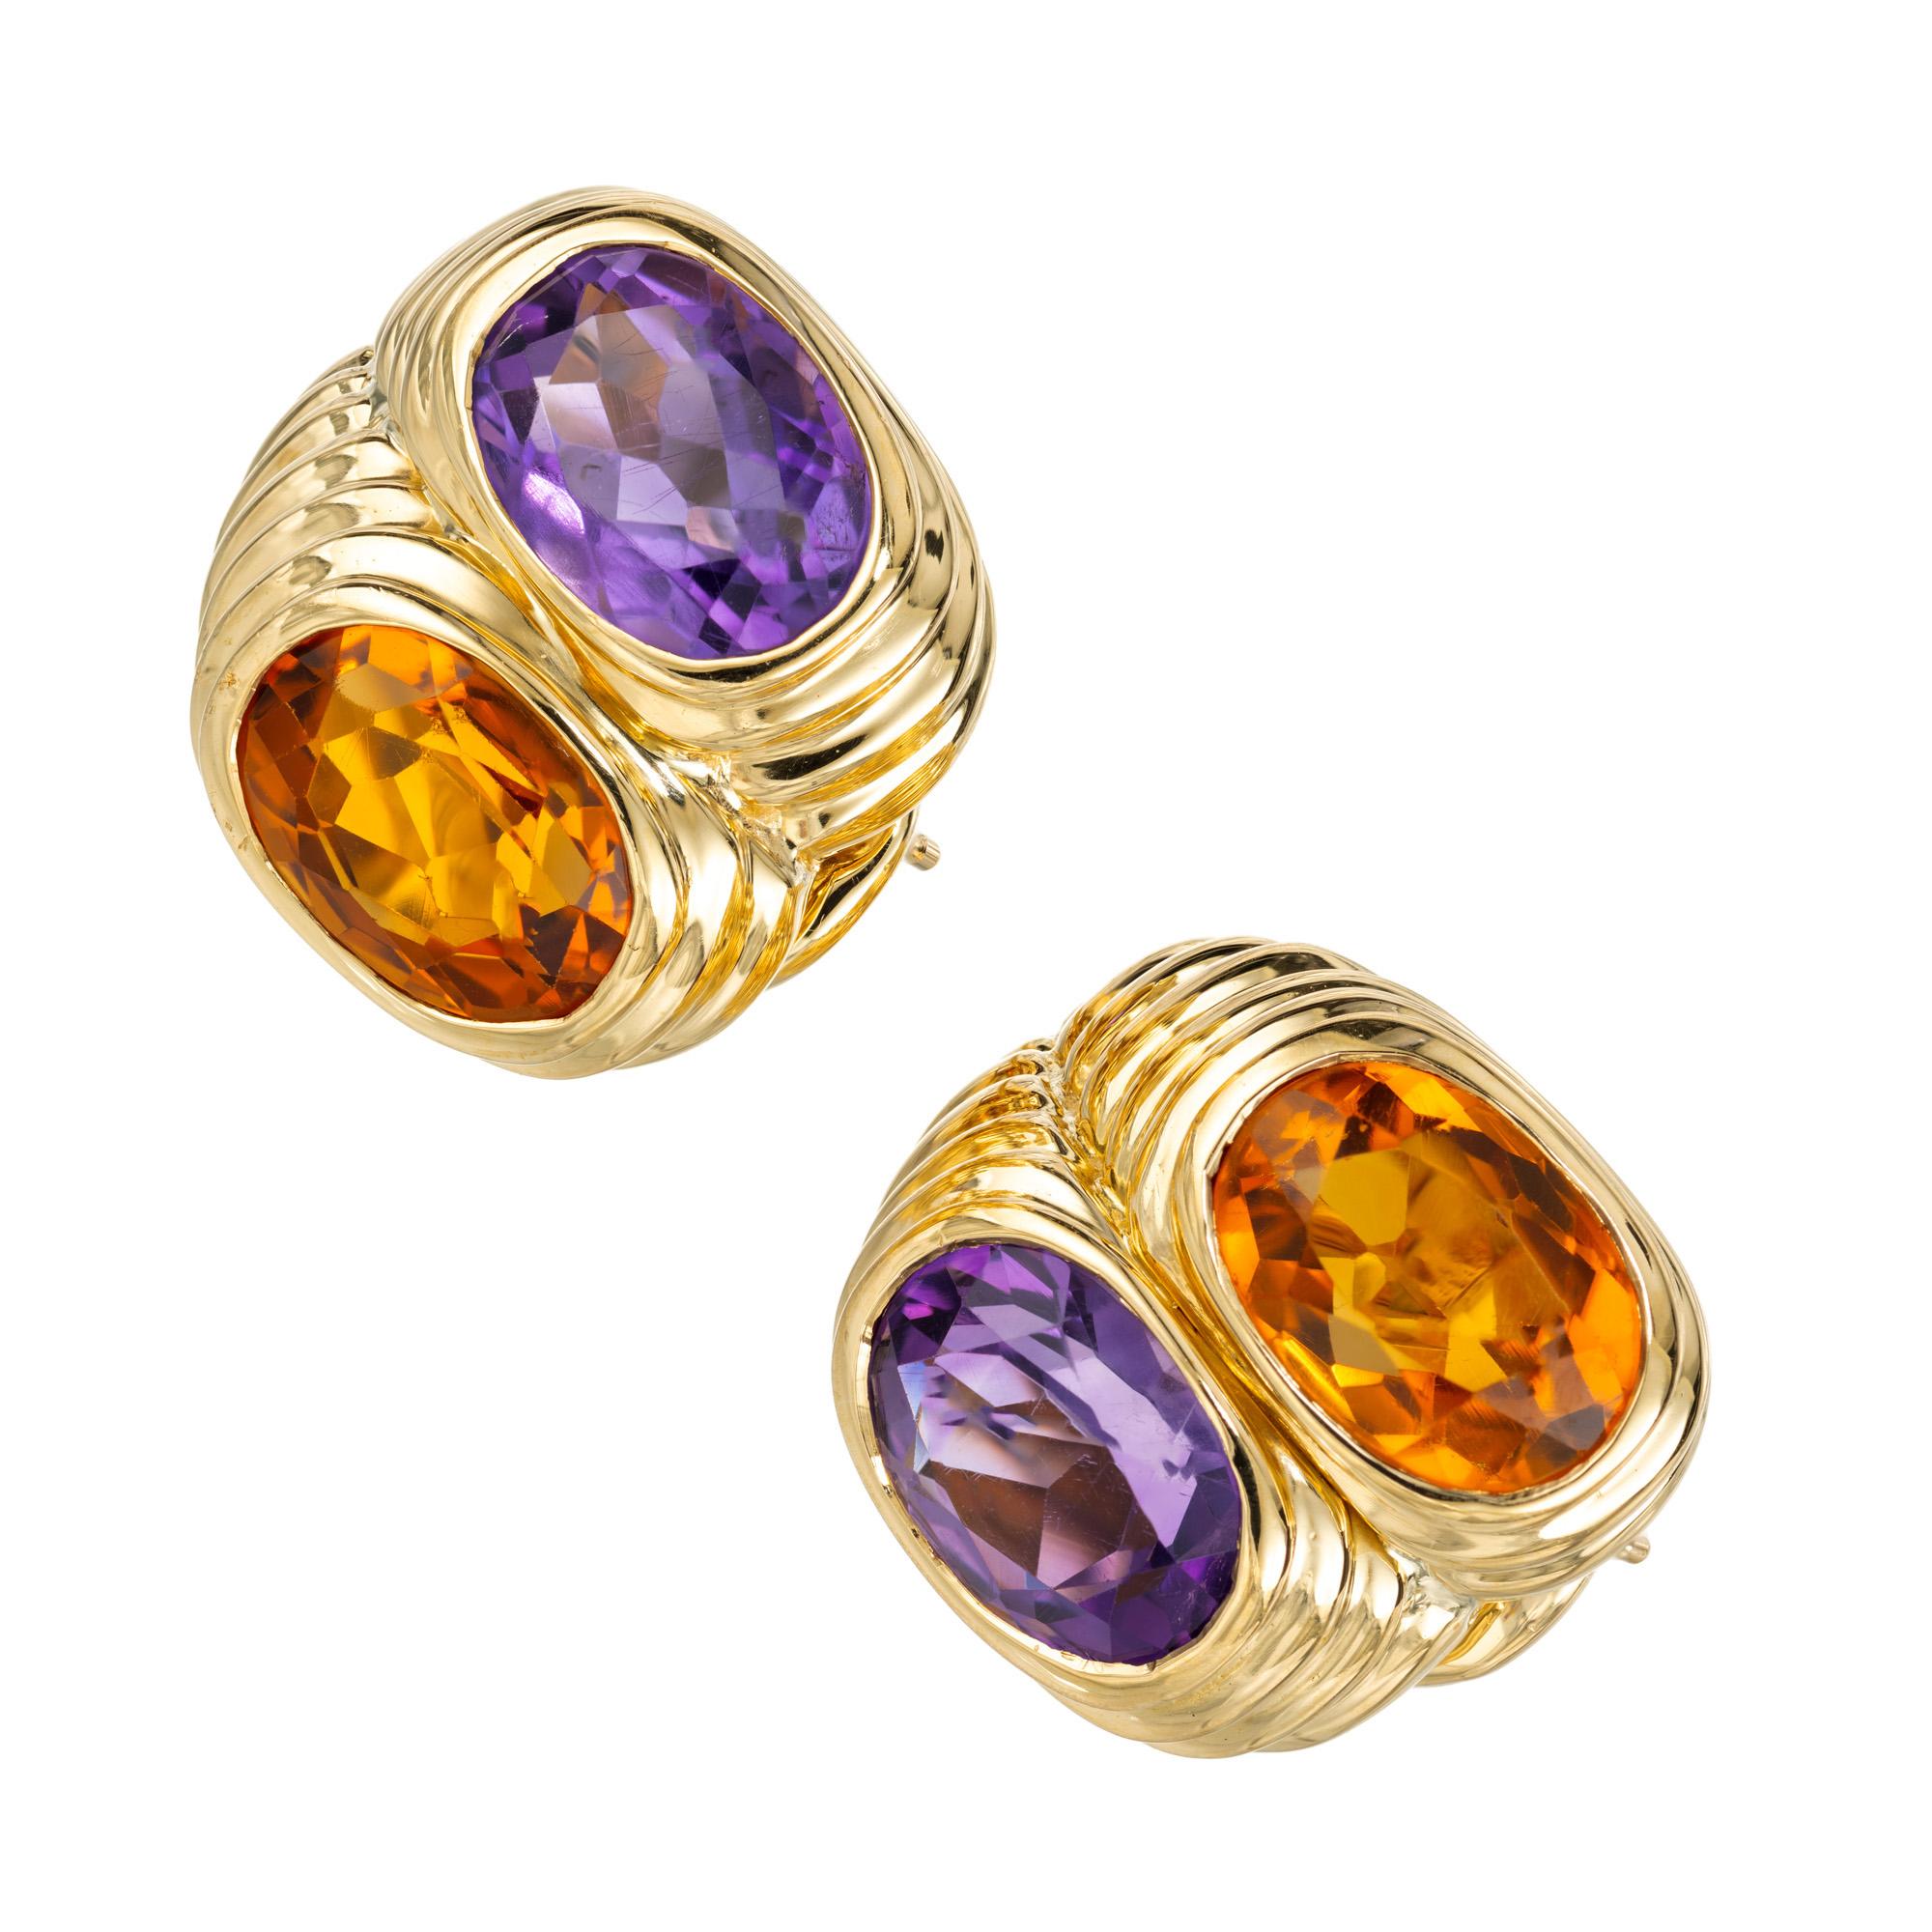 1960's Mid Century Amethyst and Citrine lever back earrings. Each 18k yellow gold setting is adorned with 2 oval purple amethysts totaling 3.25 and accompanied with 2 oval yellow and orange citrines also totaling 3.25cts. These earrings have secure